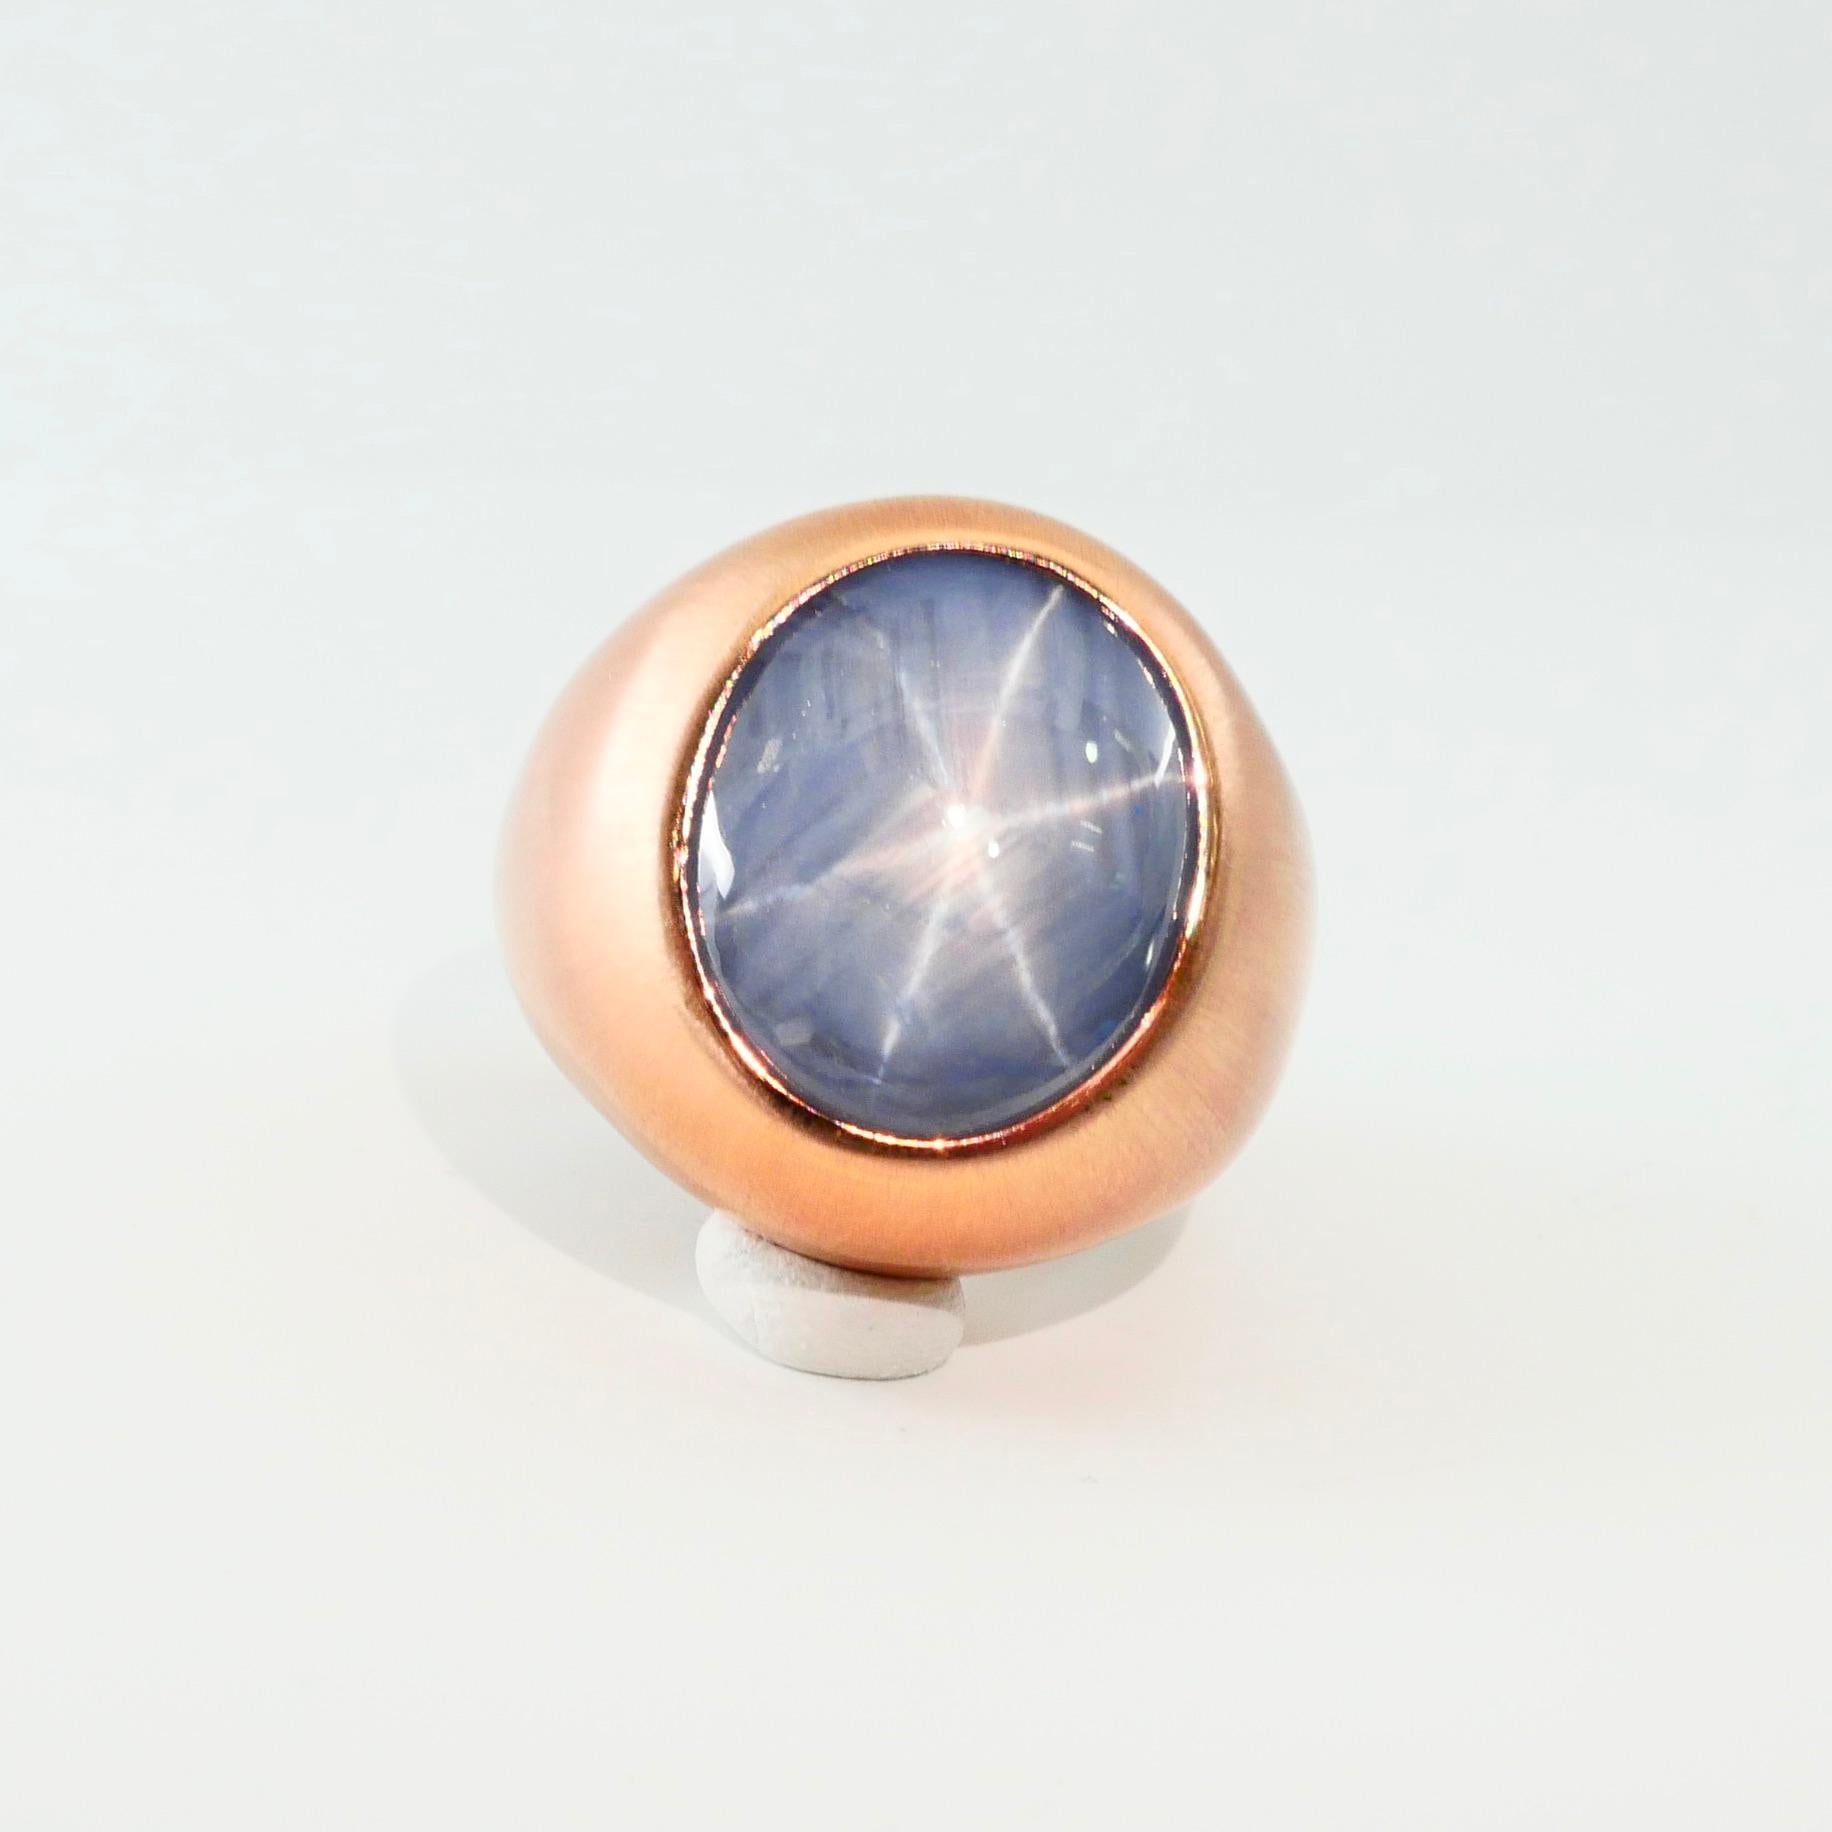 Certified Blue Star Sapphire 39.28 Carat Rose Gold Ring, Unisex, Strong Star 5